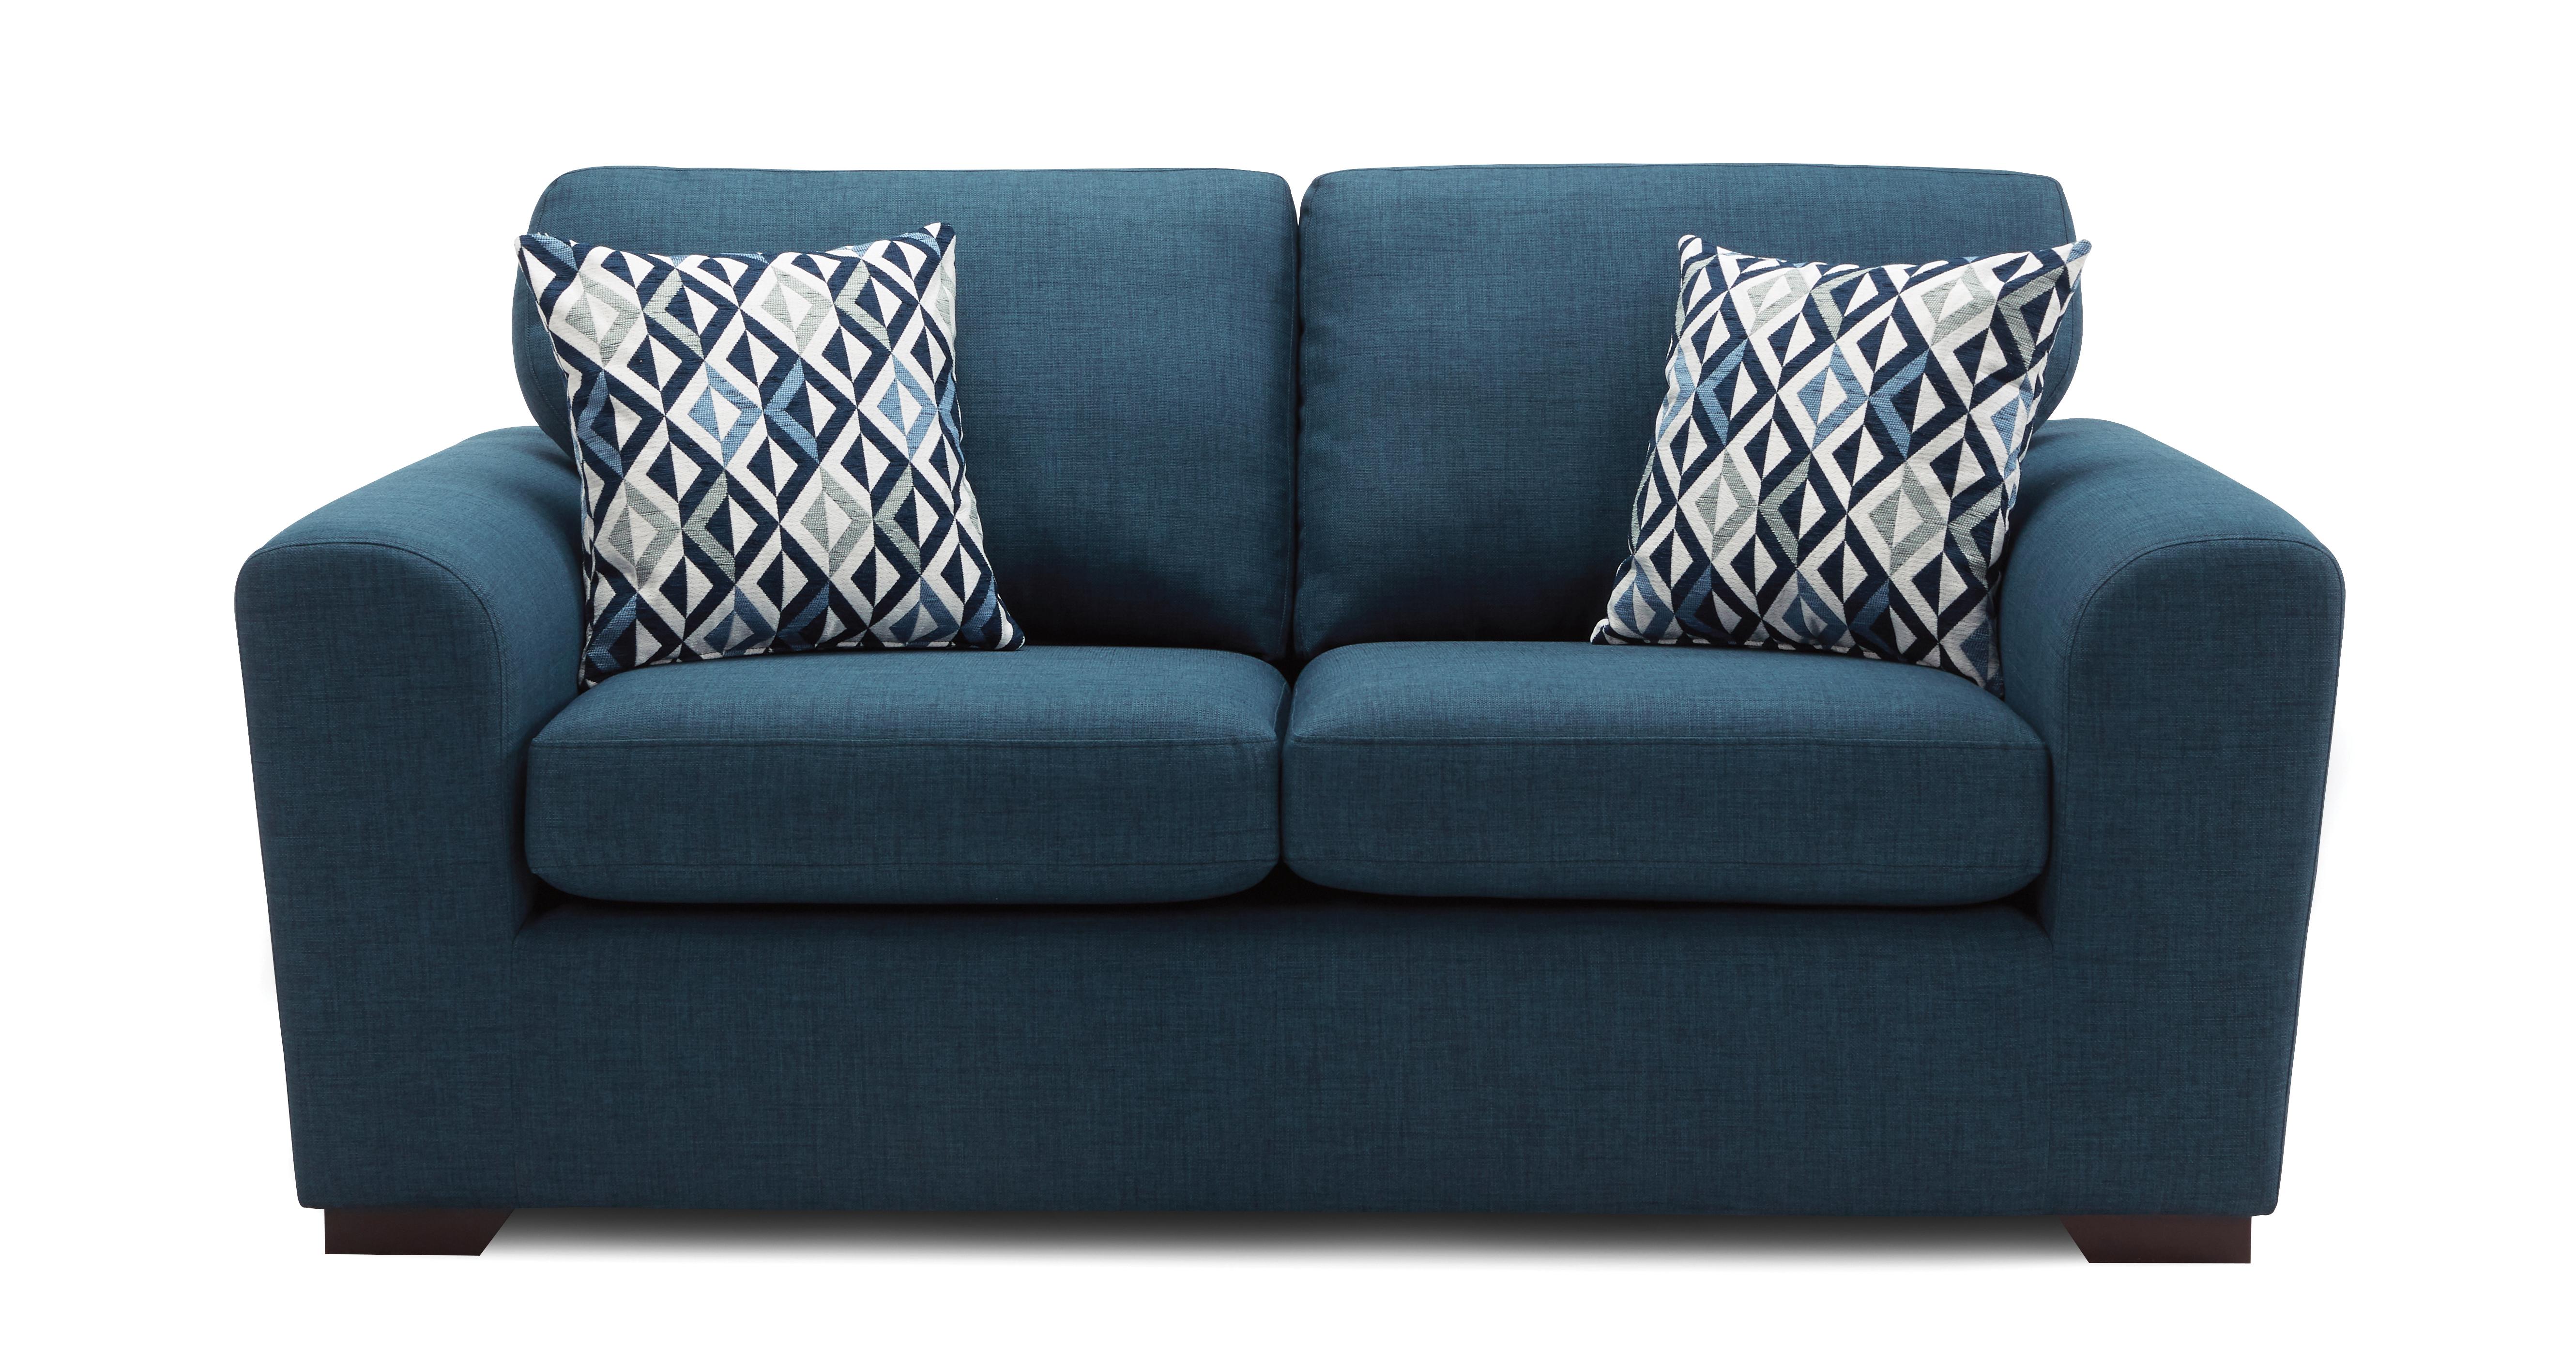 Zeb Small 2  Seater  Sofa  Revive DFS